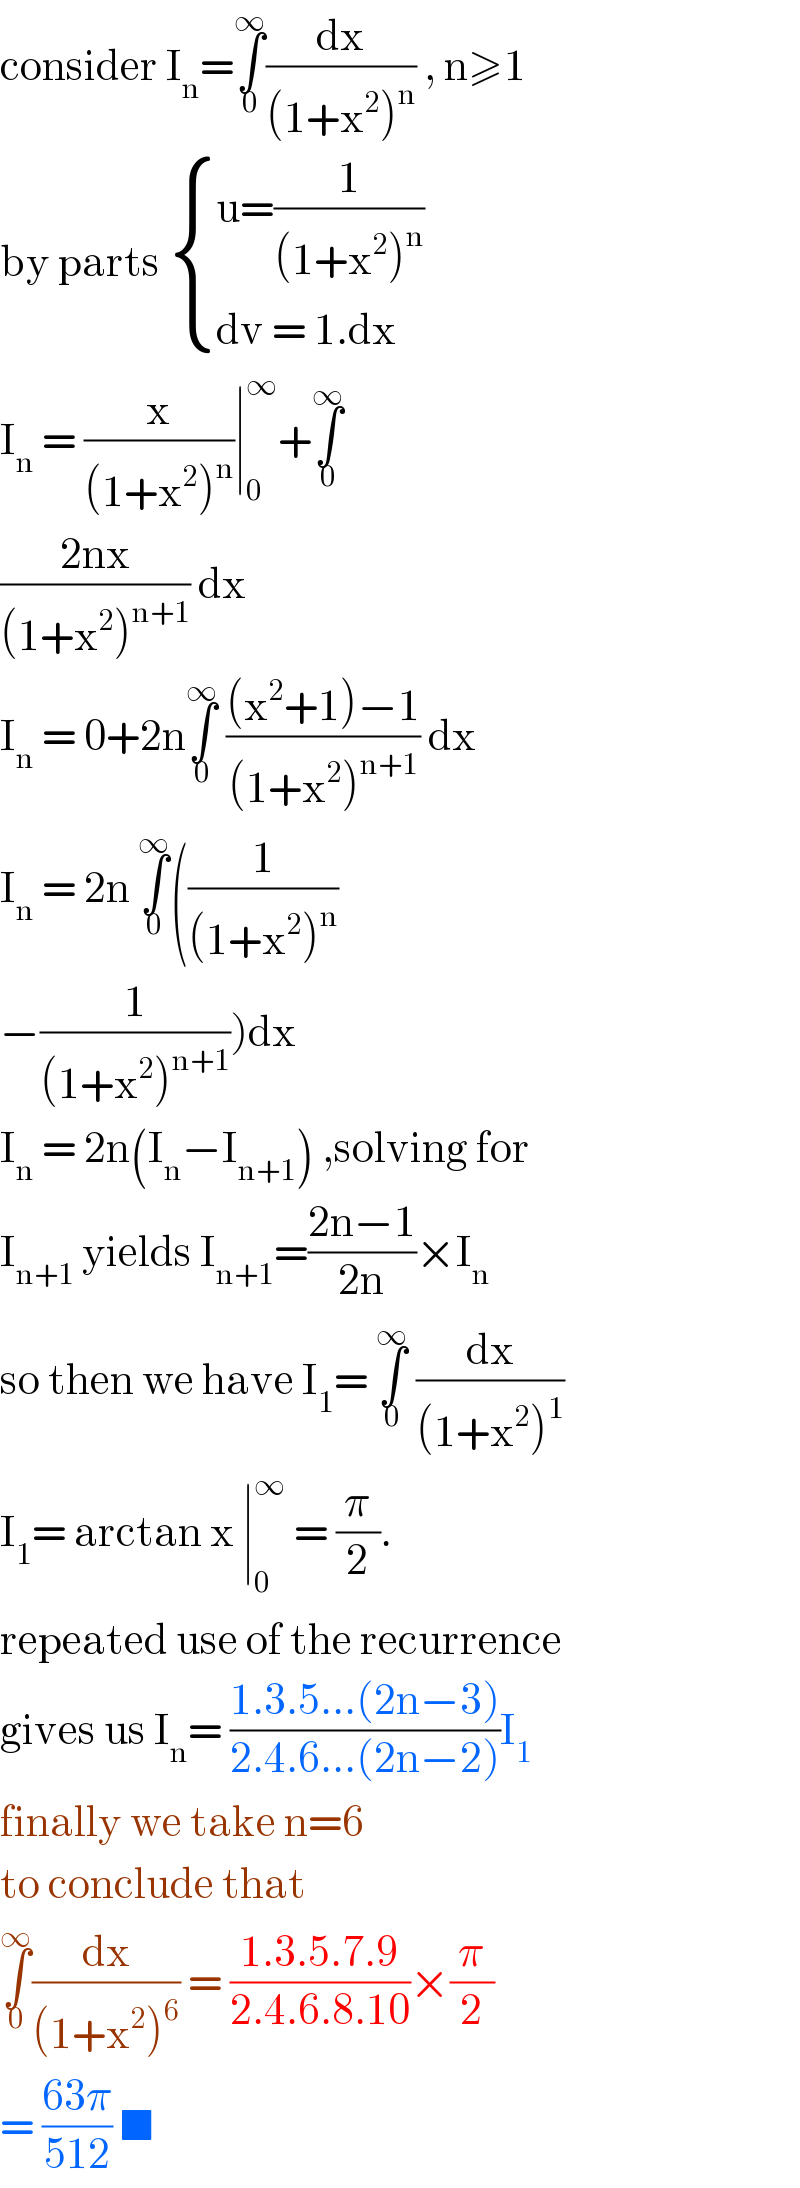 consider I_n =∫_0 ^∞ (dx/((1+x^2 )^n )) , n≥1  by parts  { ((u=(1/((1+x^2 )^n )))),((dv = 1.dx)) :}  I_n  = (x/((1+x^2 )^n ))∣_0 ^∞ +∫_0 ^∞   ((2nx)/((1+x^2 )^(n+1) )) dx  I_n  = 0+2n∫_0 ^∞  (((x^2 +1)−1)/((1+x^2 )^(n+1) )) dx  I_n  = 2n ∫_0 ^∞ ((1/((1+x^2 )^n ))  −(1/((1+x^2 )^(n+1) )))dx  I_n  = 2n(I_n −I_(n+1) ) ,solving for  I_(n+1)  yields I_(n+1) =((2n−1)/(2n))×I_n   so then we have I_1 = ∫_0 ^∞  (dx/((1+x^2 )^1 ))  I_1 = arctan x ∣_0 ^∞  = (π/2).  repeated use of the recurrence  gives us I_n = ((1.3.5...(2n−3))/(2.4.6...(2n−2)))I_1   finally we take n=6  to conclude that   ∫_0 ^∞ (dx/((1+x^2 )^6 )) = ((1.3.5.7.9)/(2.4.6.8.10))×(π/2)  = ((63π)/(512)) ■   